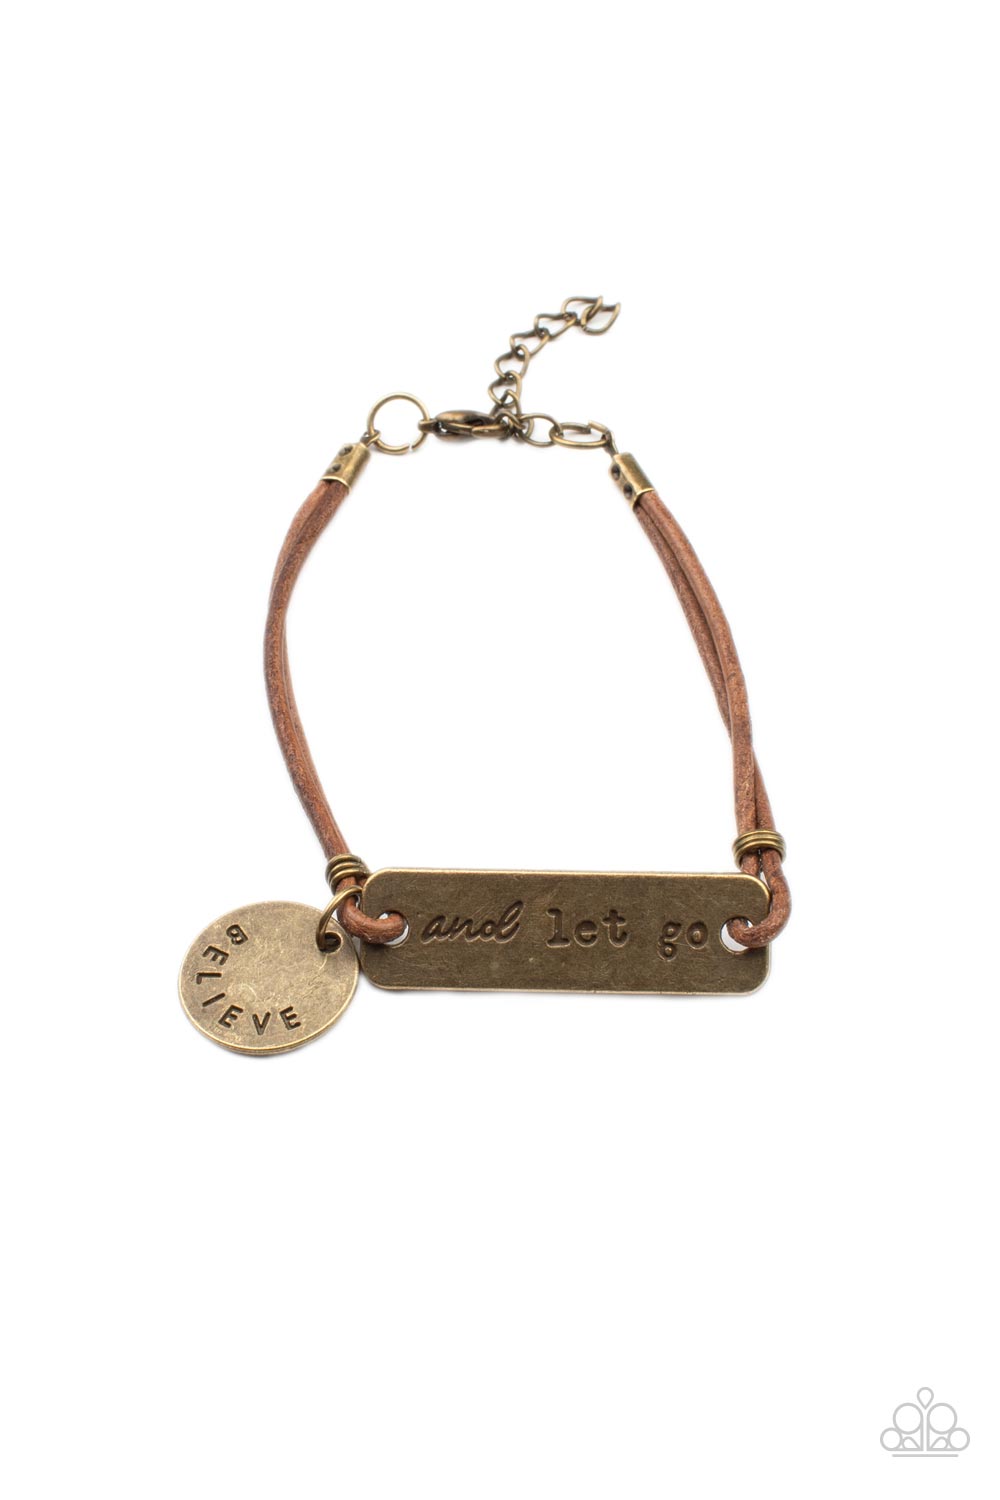 Believe and Let Go - Brass Urban Motivational Bracelets an antiqued disc stamped in the word, "believe" and a brass plate stamped in the phrase, "and let go," are knotted in place around the wrist with layers of brown suede cording, creating a motivational centerpiece. Features an adjustable clasp closure.